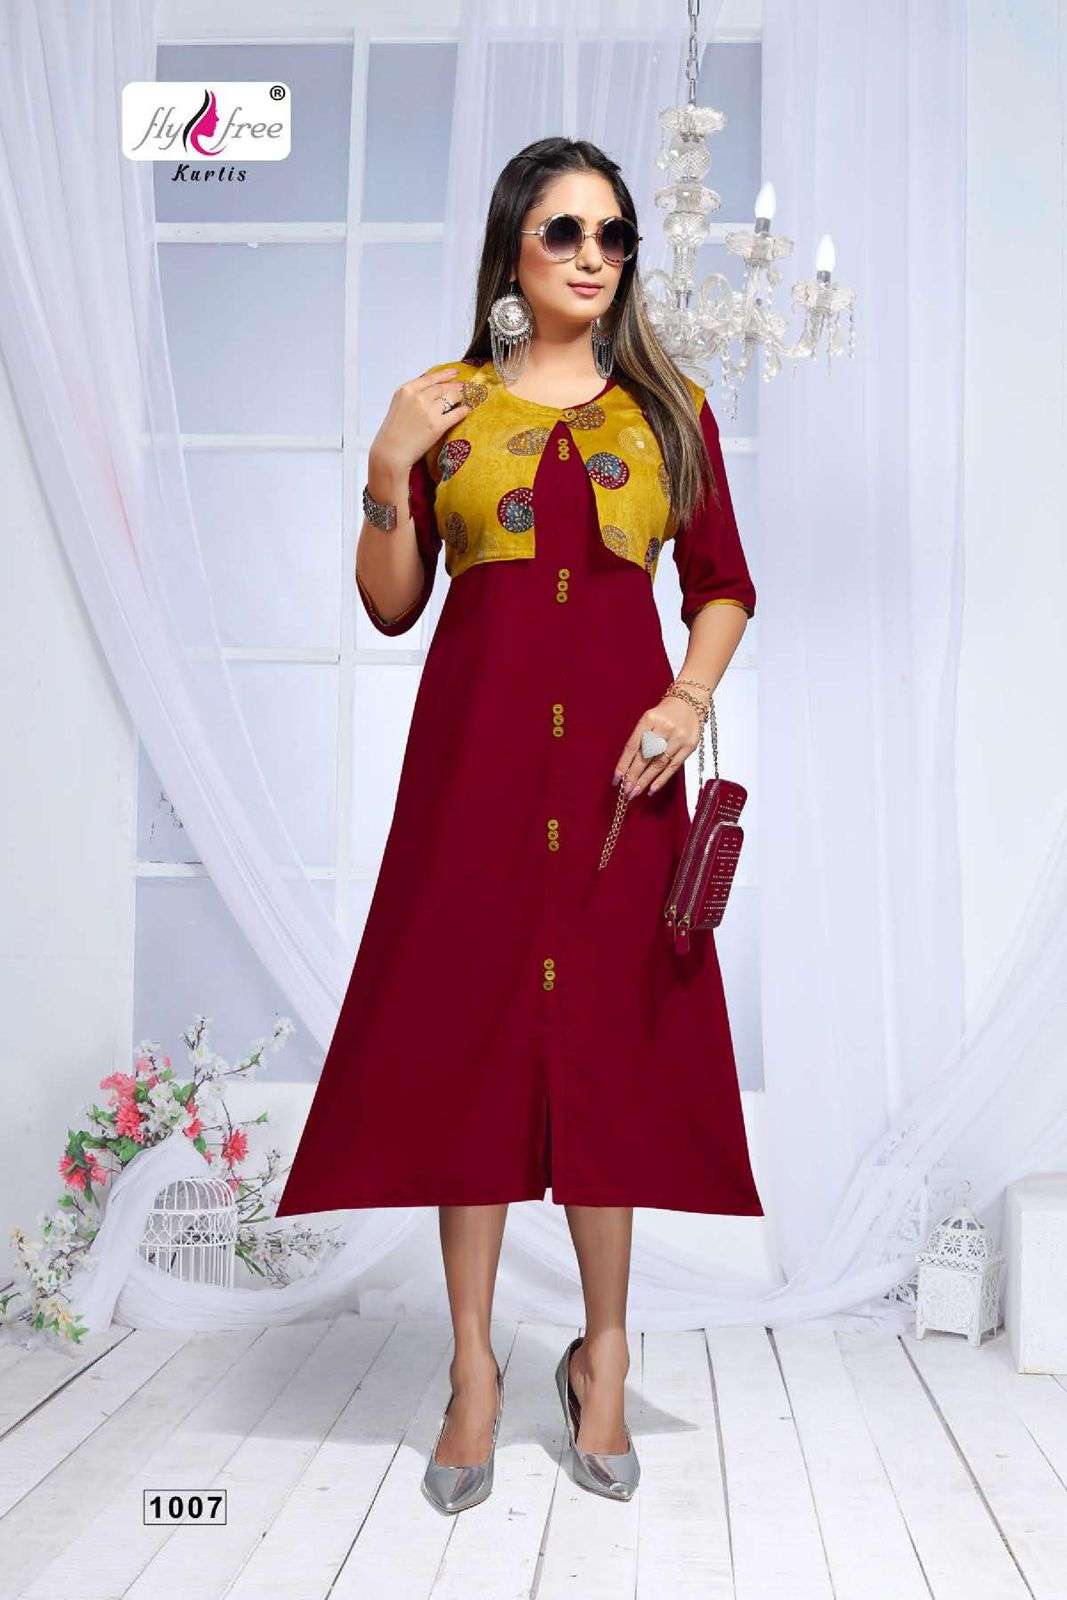 KITTY PARTY VOL-2 BY FLY FREE 1001 TO 1008 SERIES DESIGNER STYLISH FANCY COLORFUL BEAUTIFUL PARTY WEAR & ETHNIC WEAR COLLECTION HEAVY RAYON KURTIS AT WHOLESALE PRICE